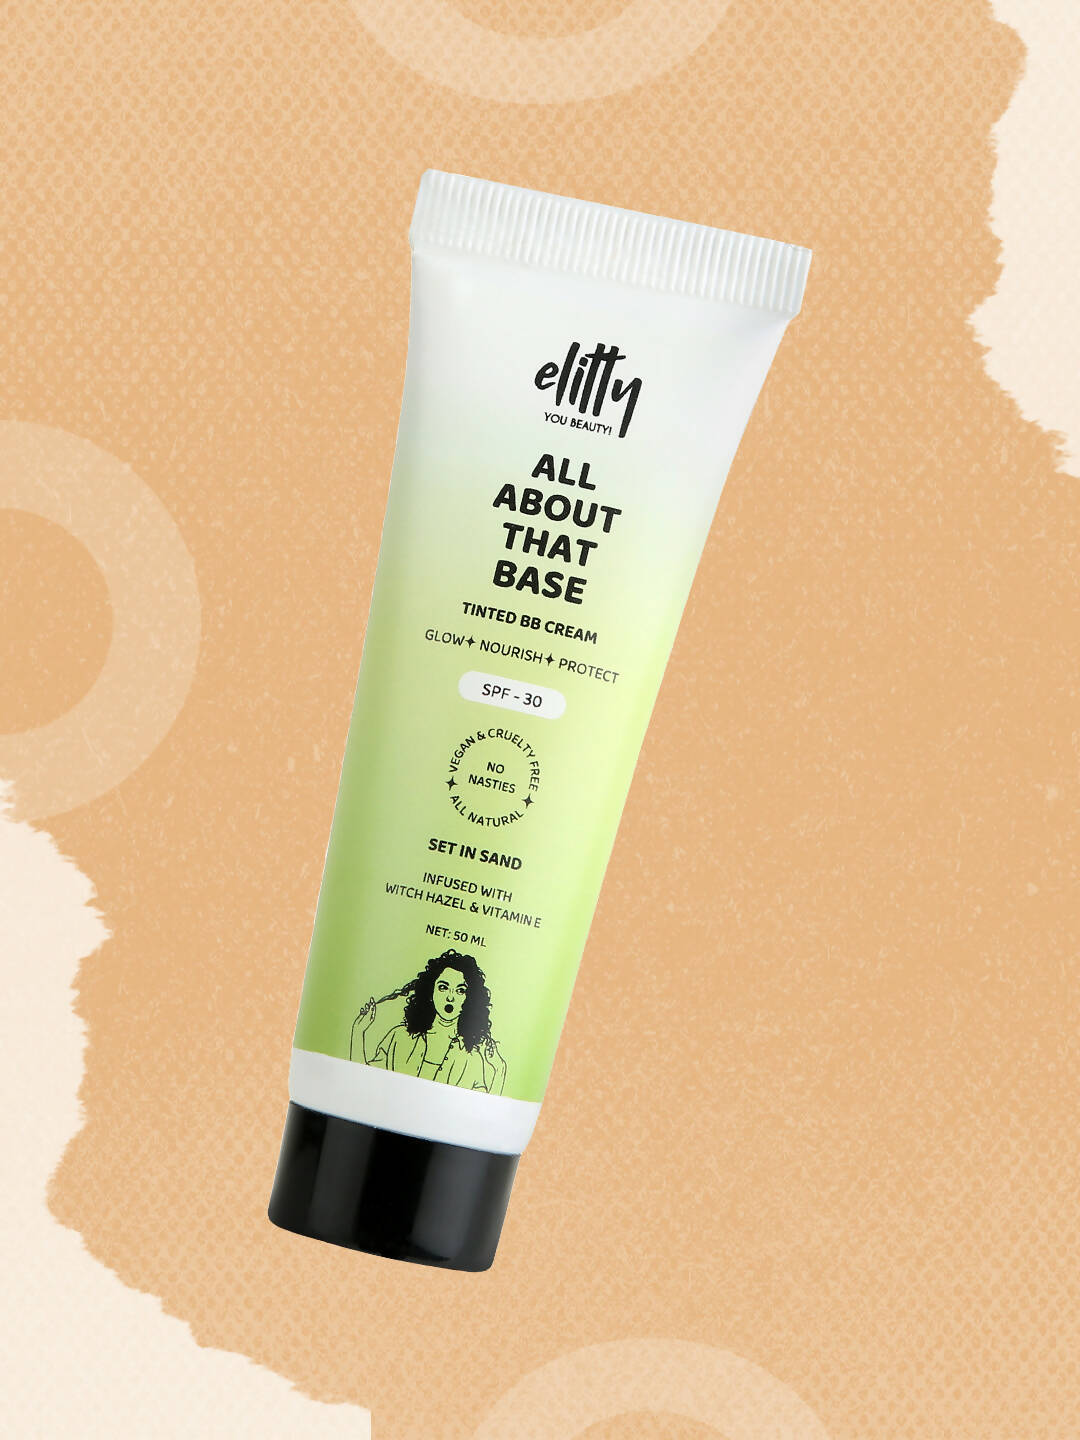 Elitty All About That Base Tinted BB Cream with SPF 30 - Set in sand - Distacart